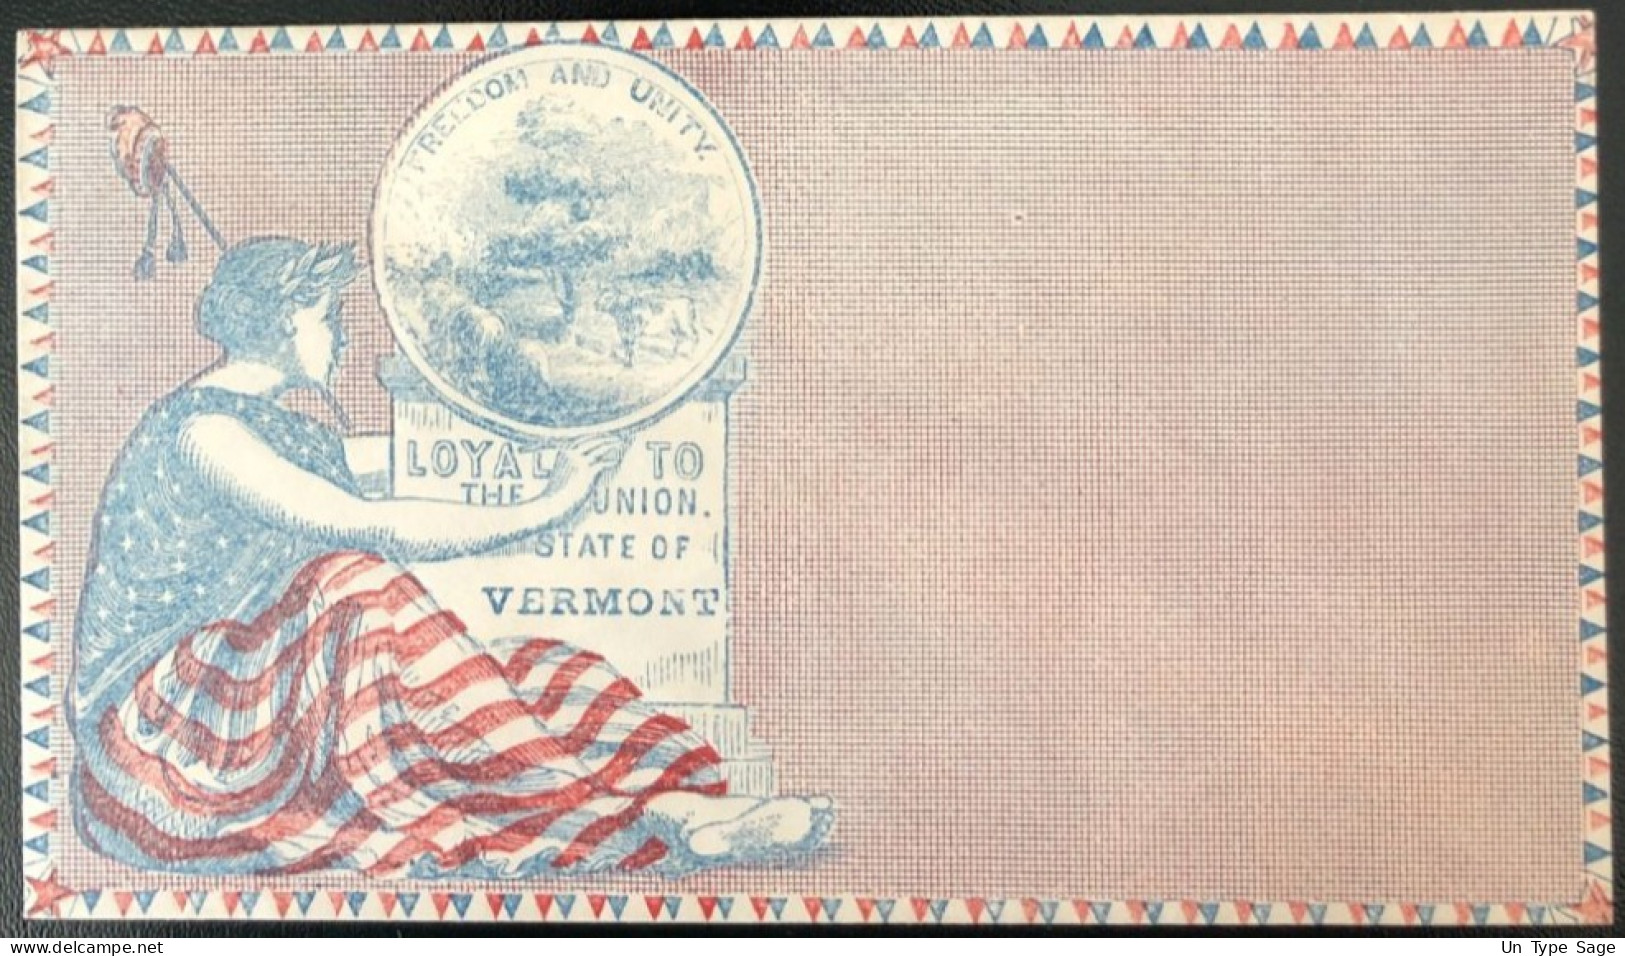 U.S.A, Civil War, Patriotic Cover - "Loyal To The Union. State Of VERMONT" - Unused - (C456) - Marcophilie